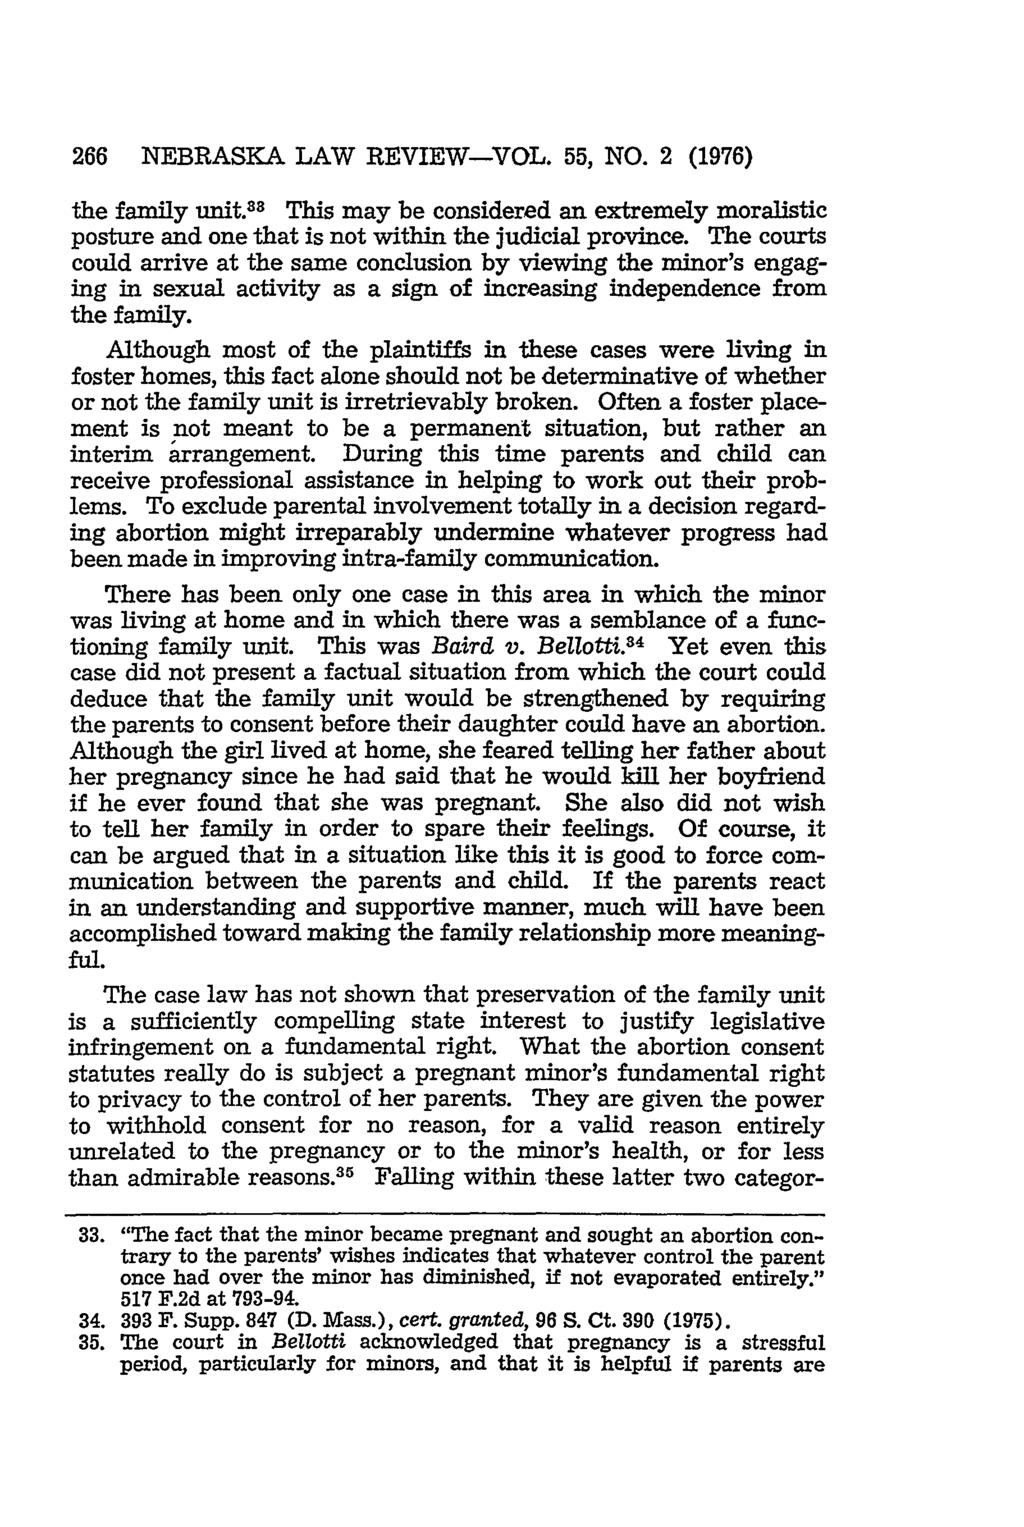 266 NEBRASKA LAW REVIEW-VOL. 55, NO. 2 (1976) the family unit. 8 8 This may be considered an extremely moralistic posture and one that is not within the judicial province.